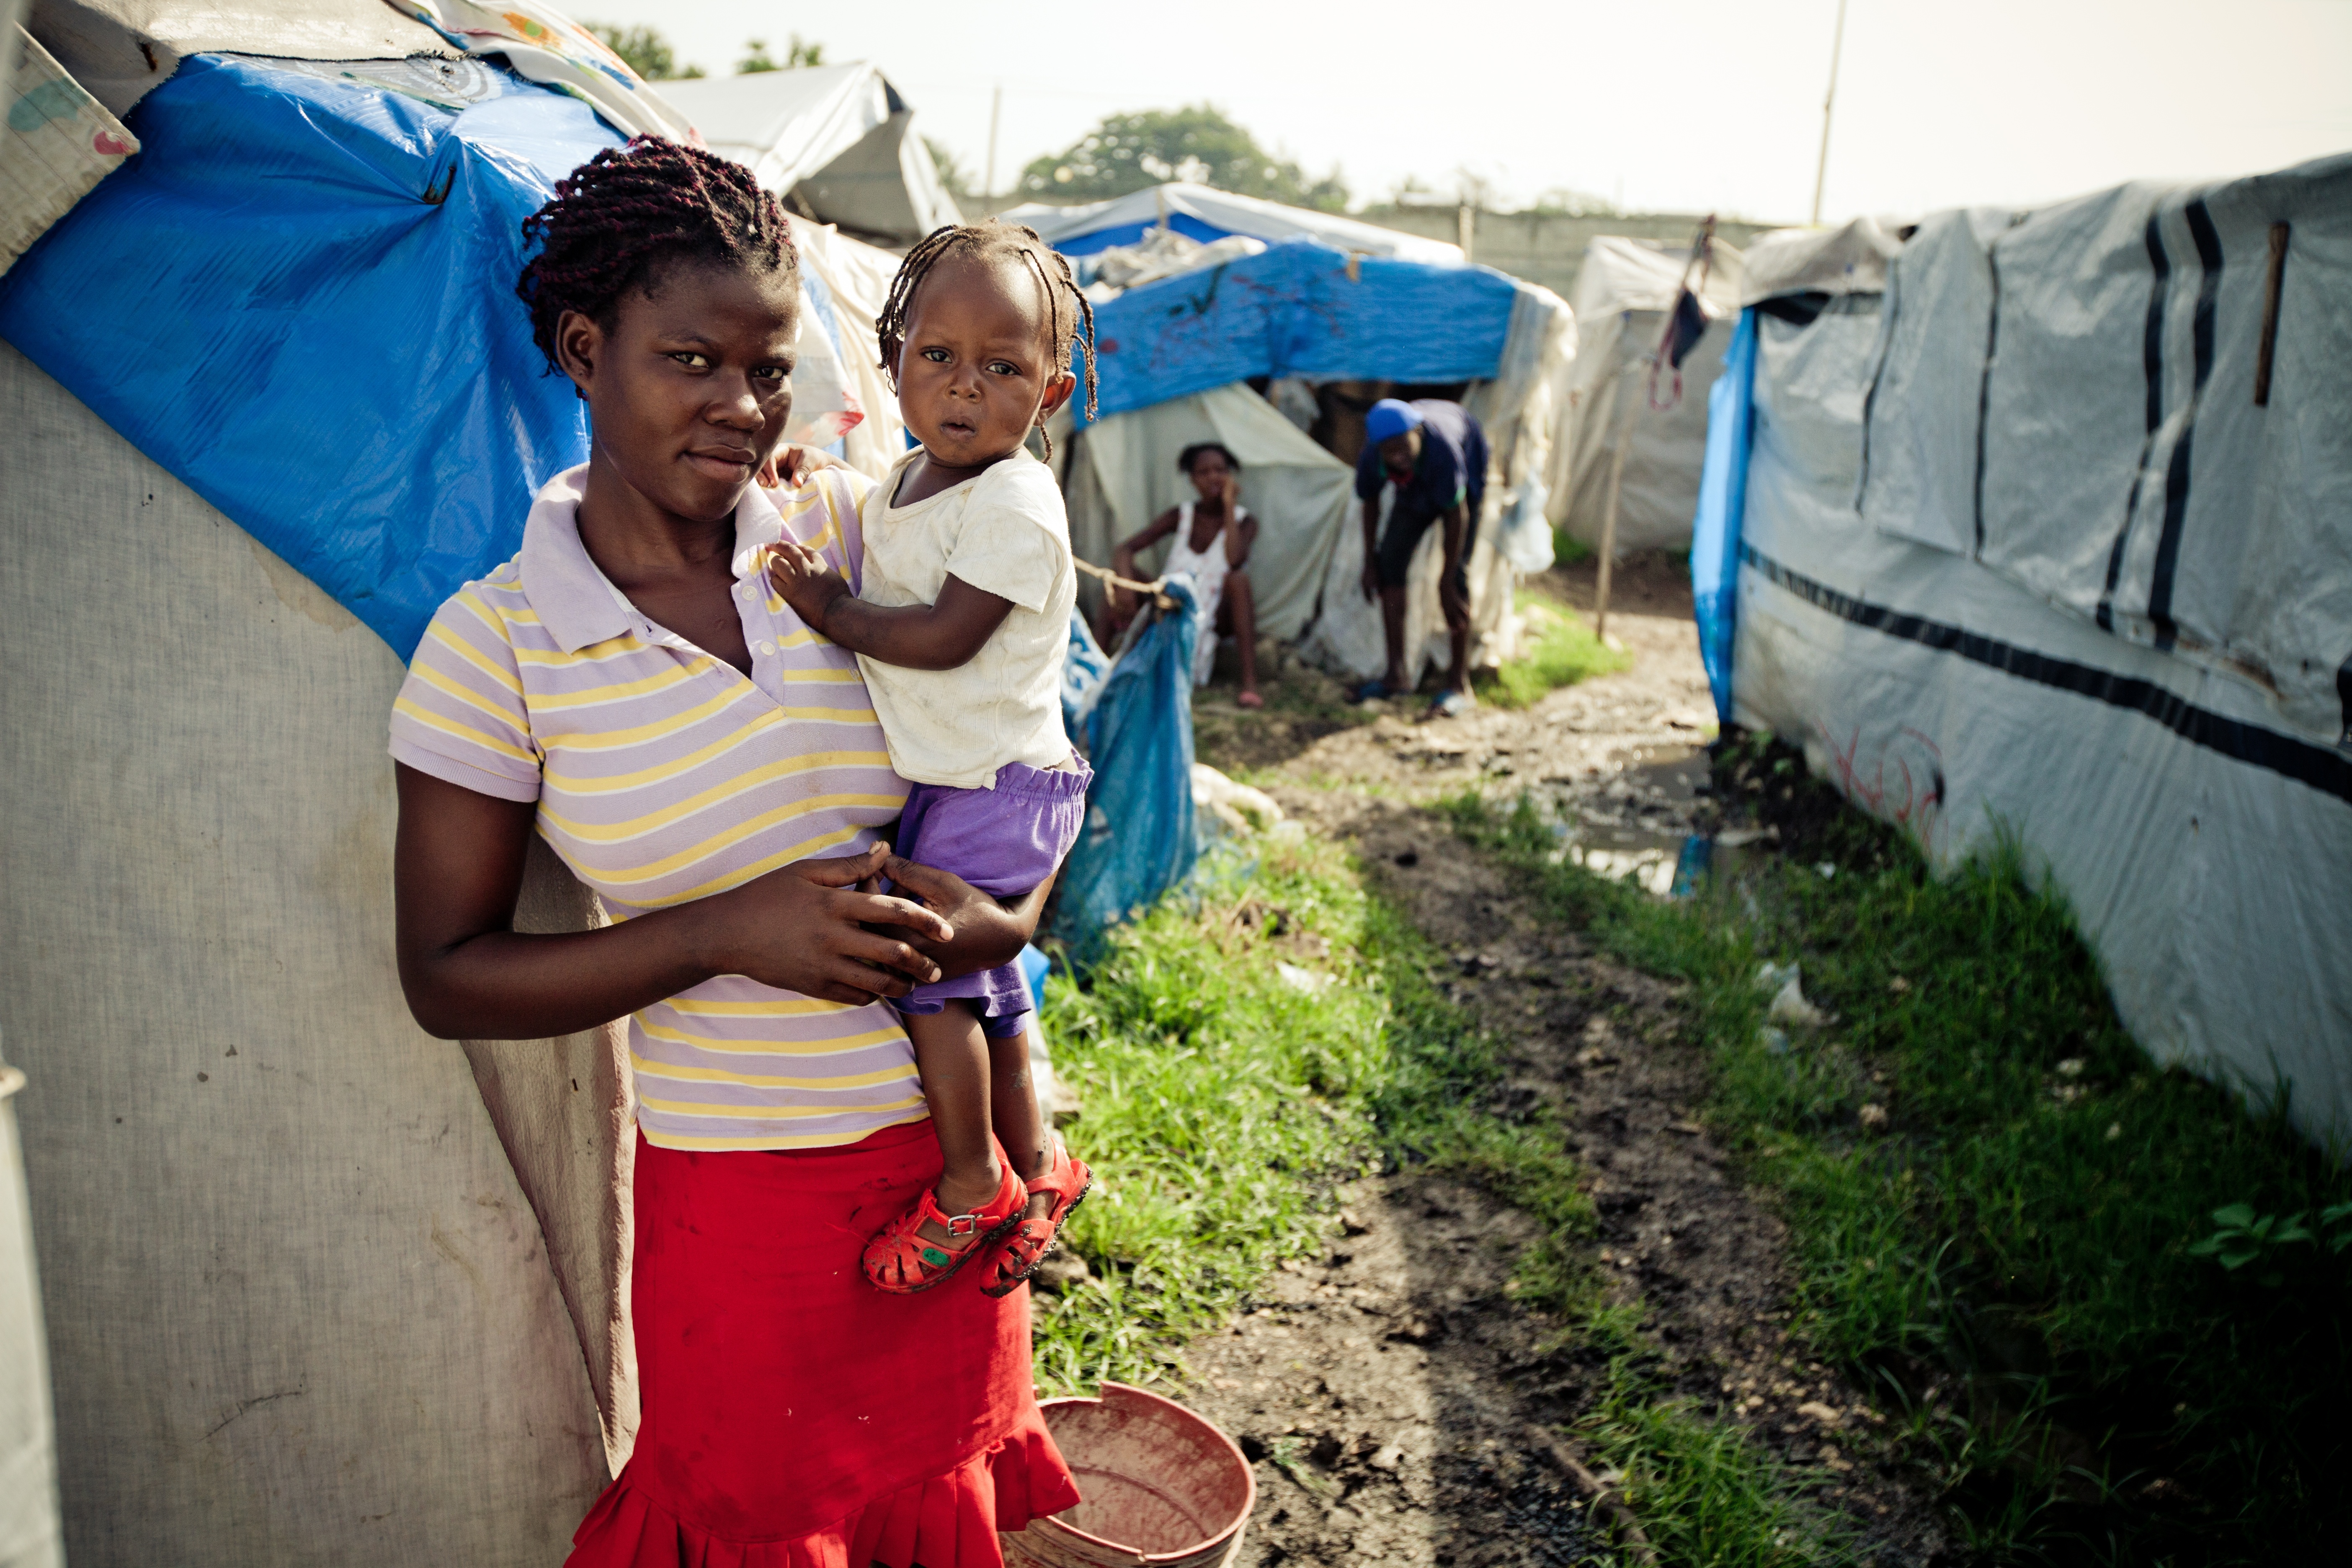 Célimène Vilaseau and her daughter in front of her tent in the camp Annexe de la Mairie in Port-au-Prince